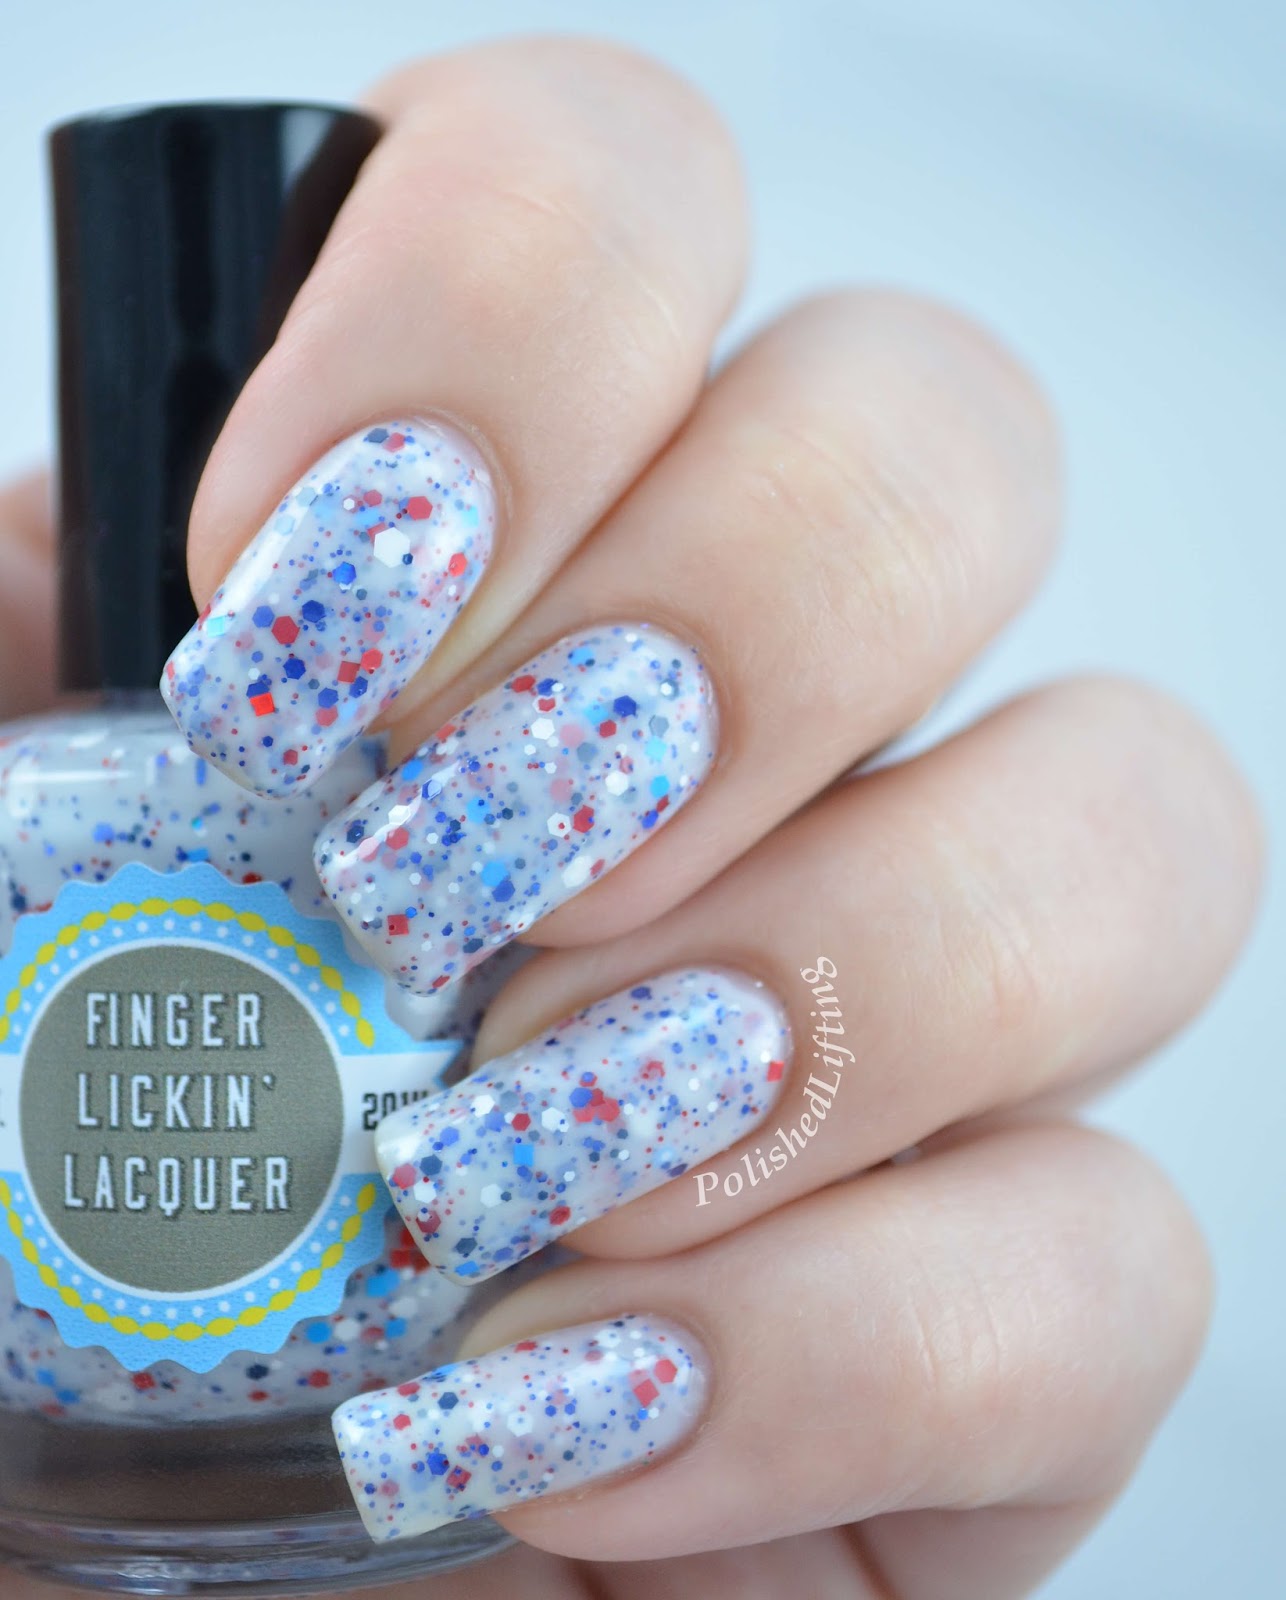 Finger Lickin' Lacquer Old Glory